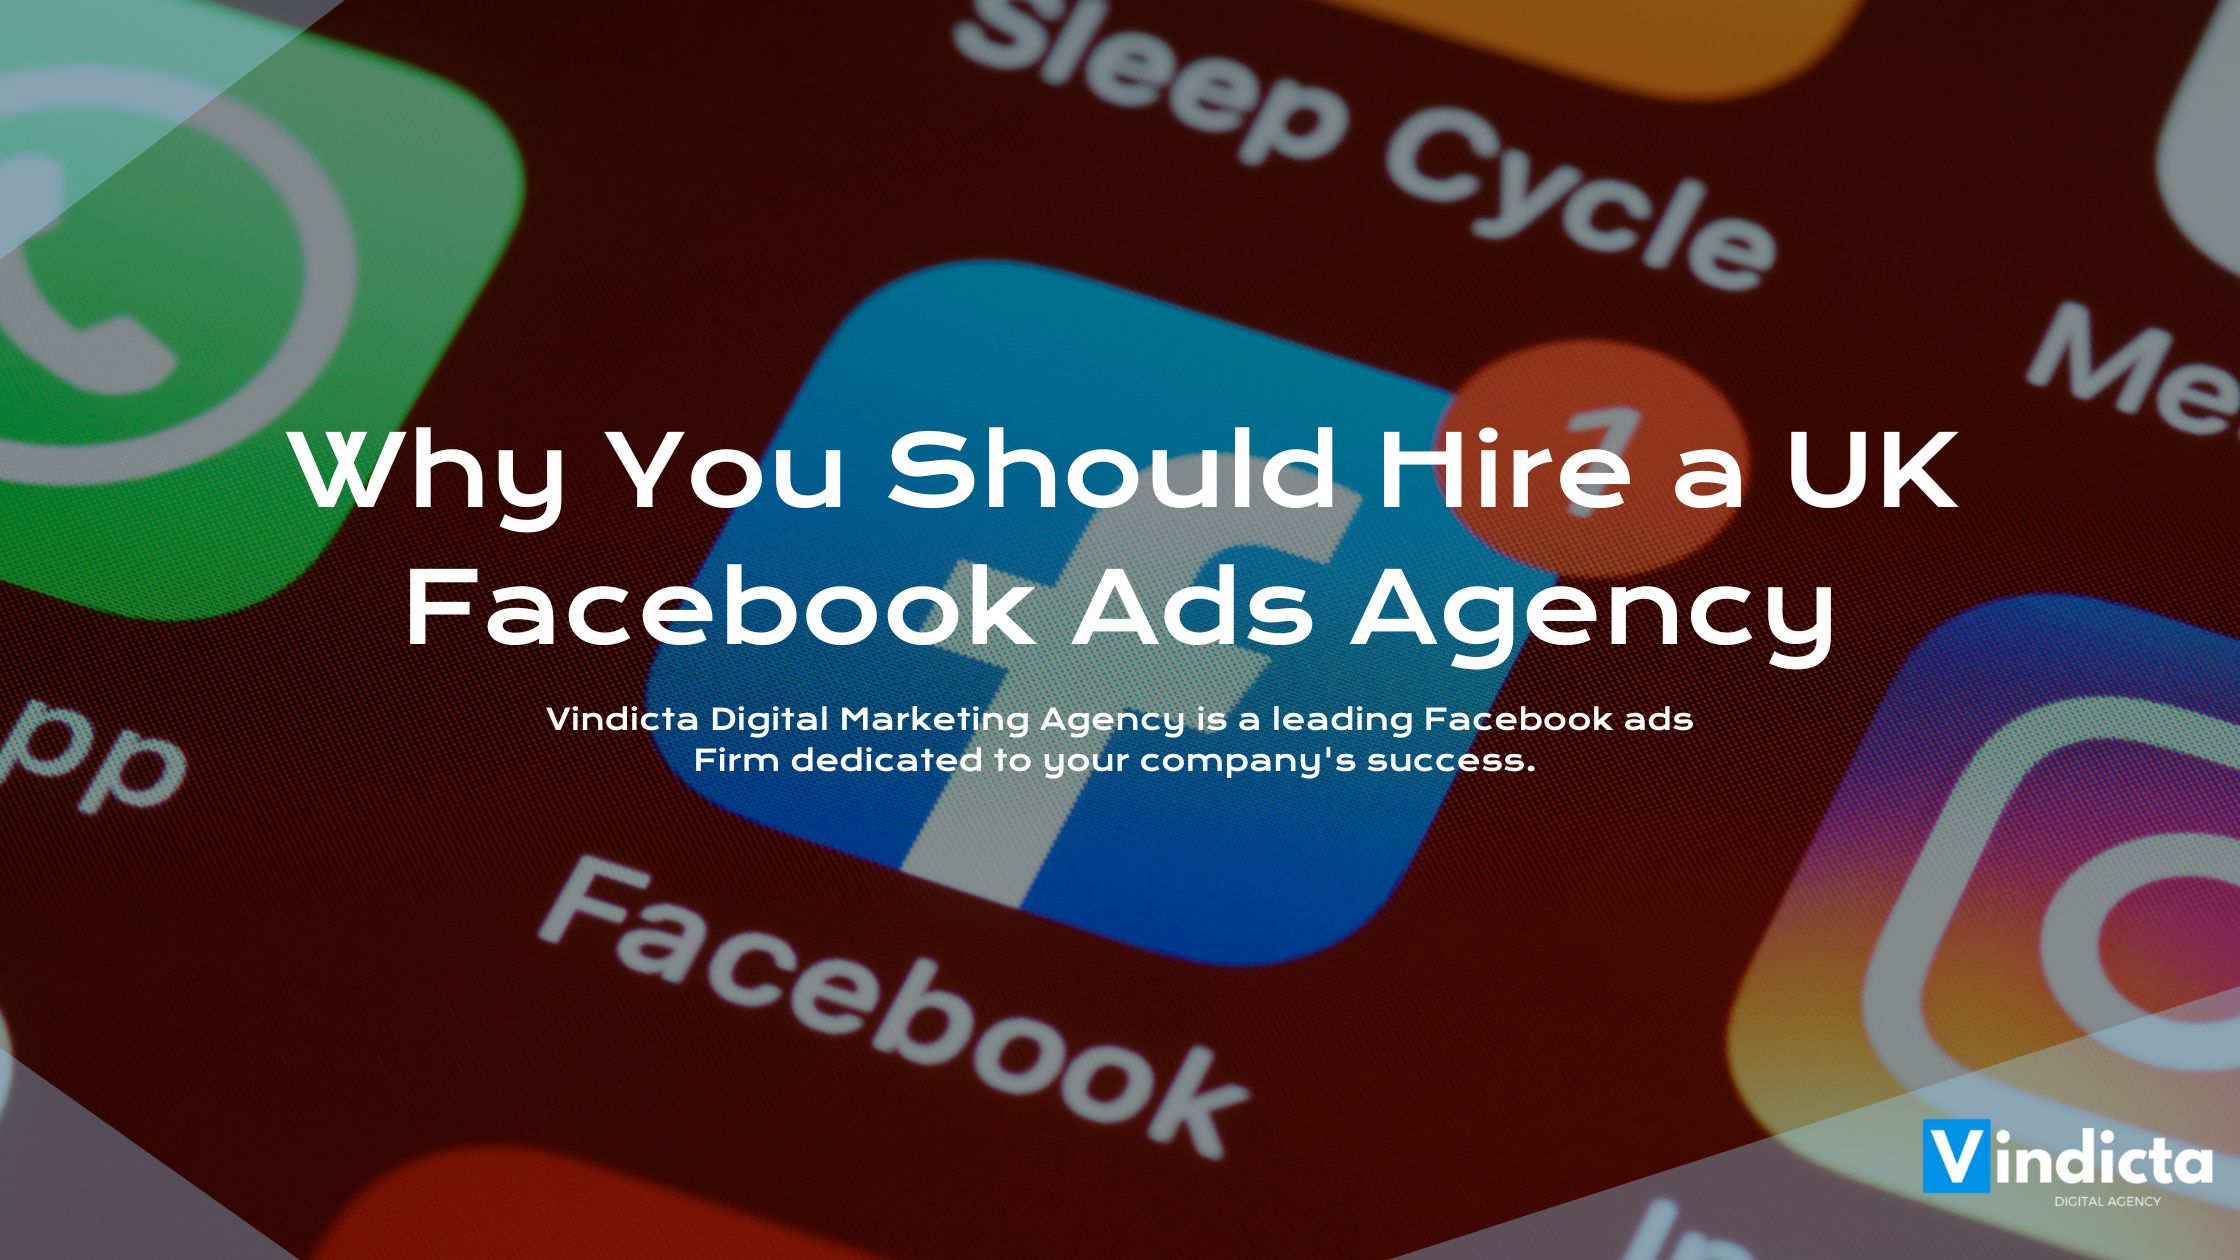 Why You Should Hire a UK Facebook Ads Agency